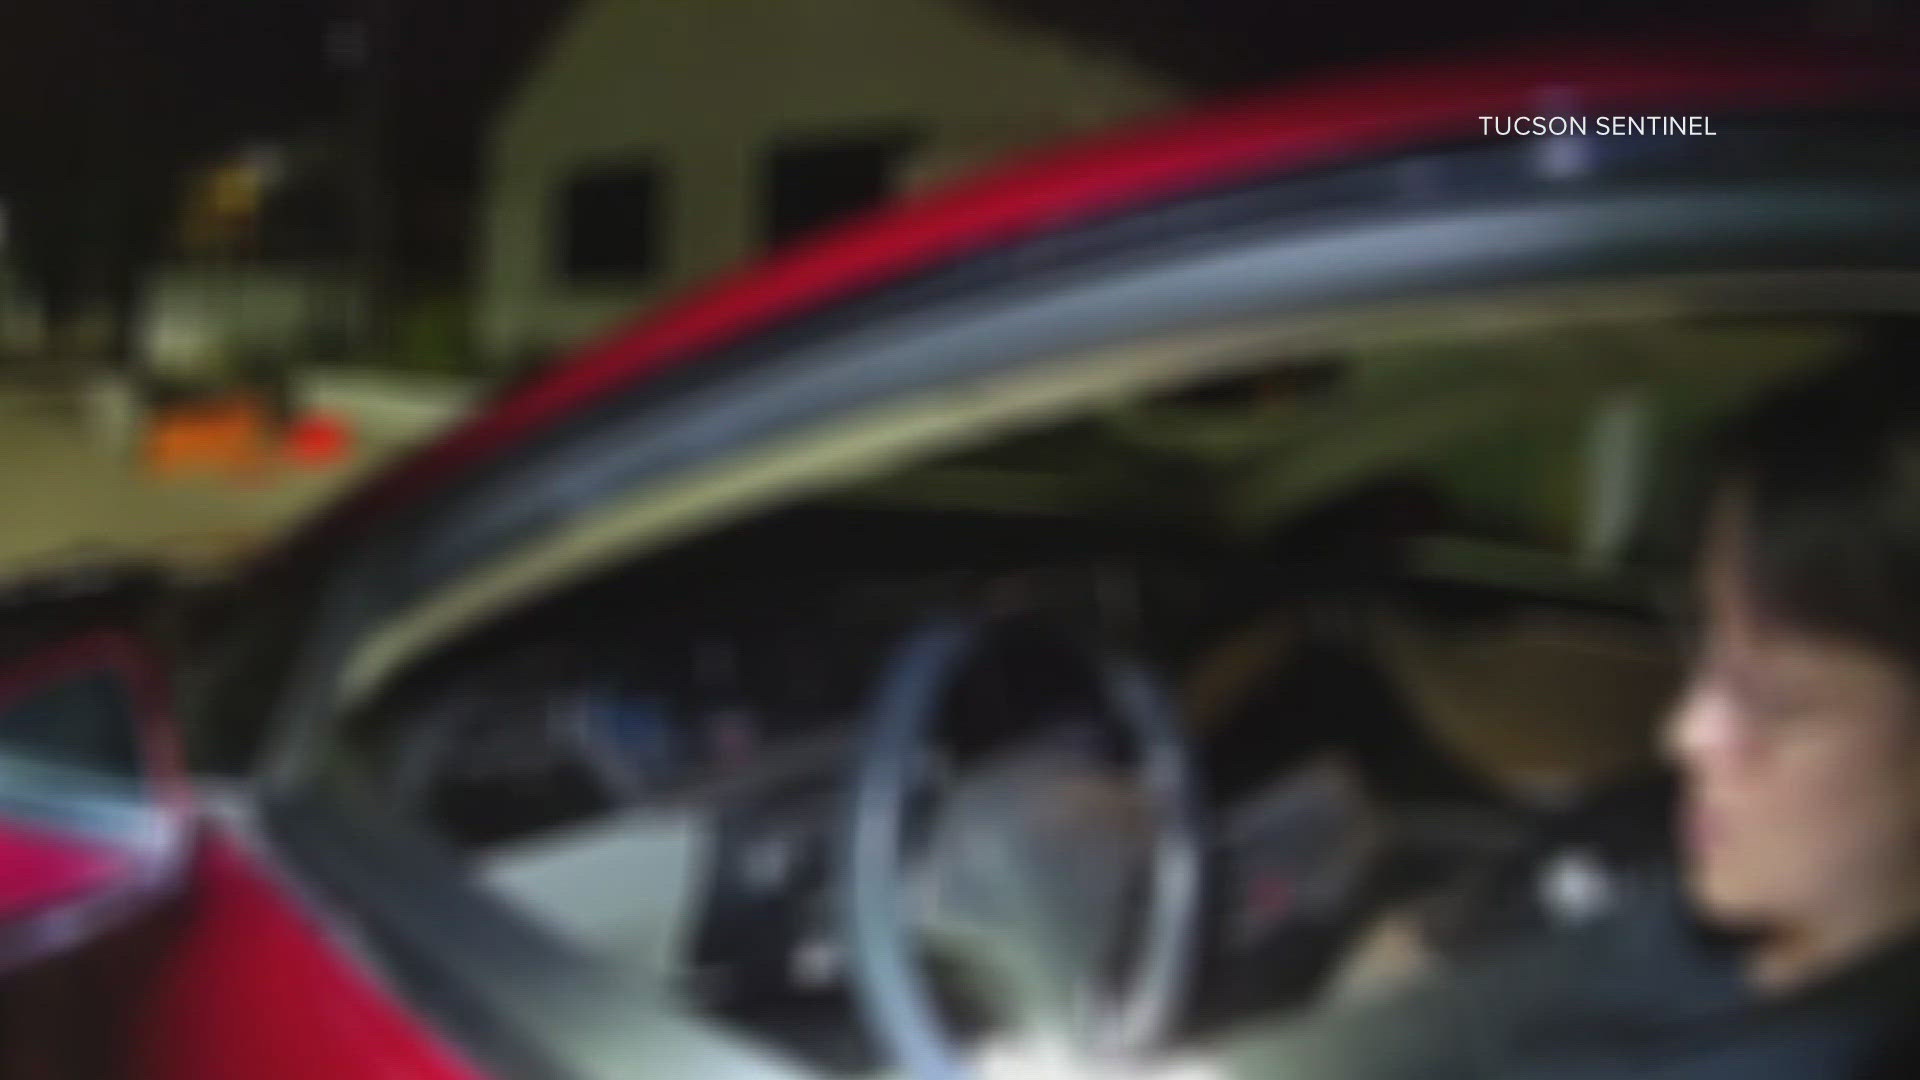 In a bodycam video, the senator said she was racing to get home because her electric car was almost out of charge.